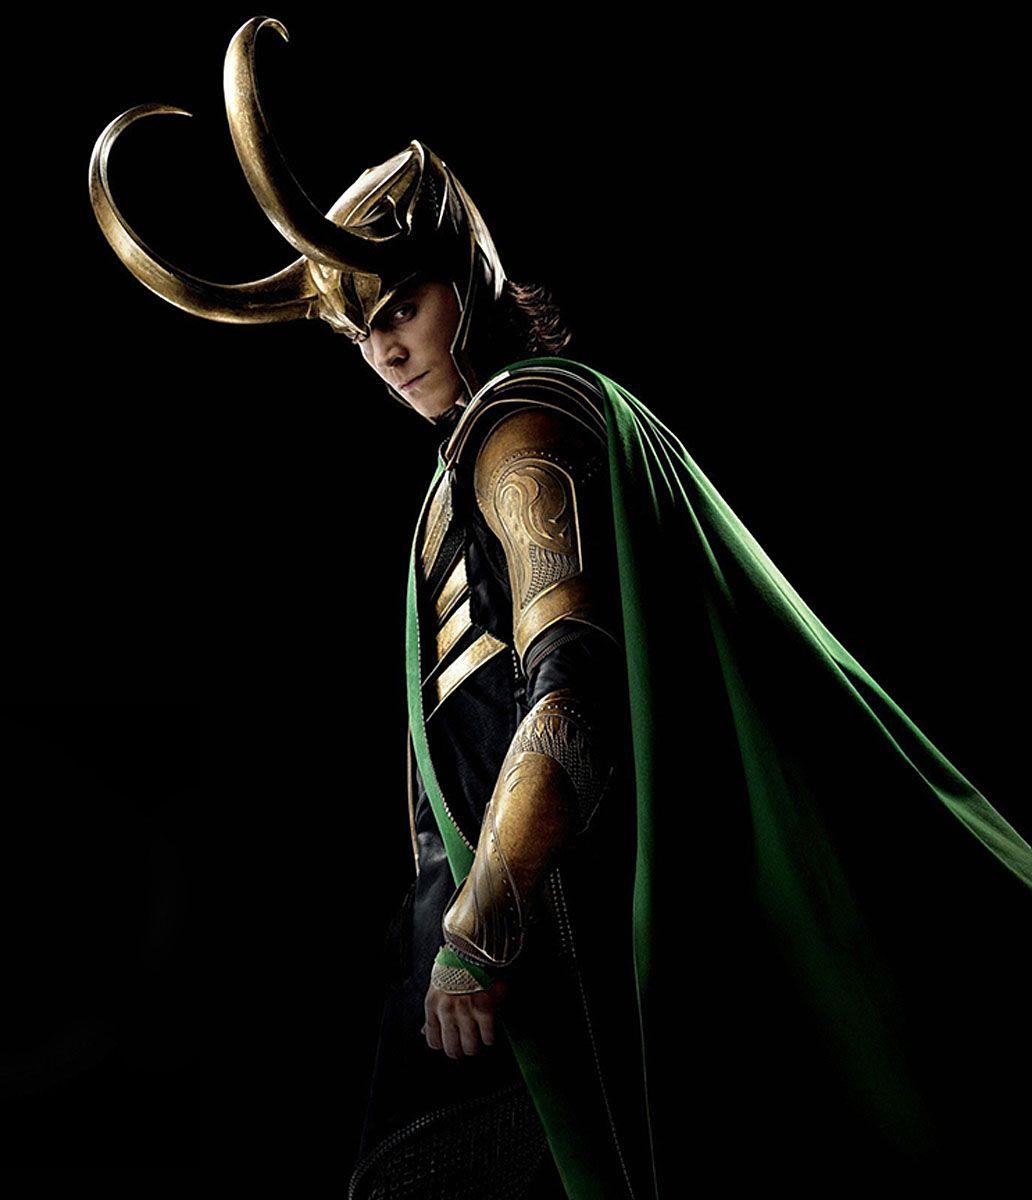 We're up all night to get Loki'd